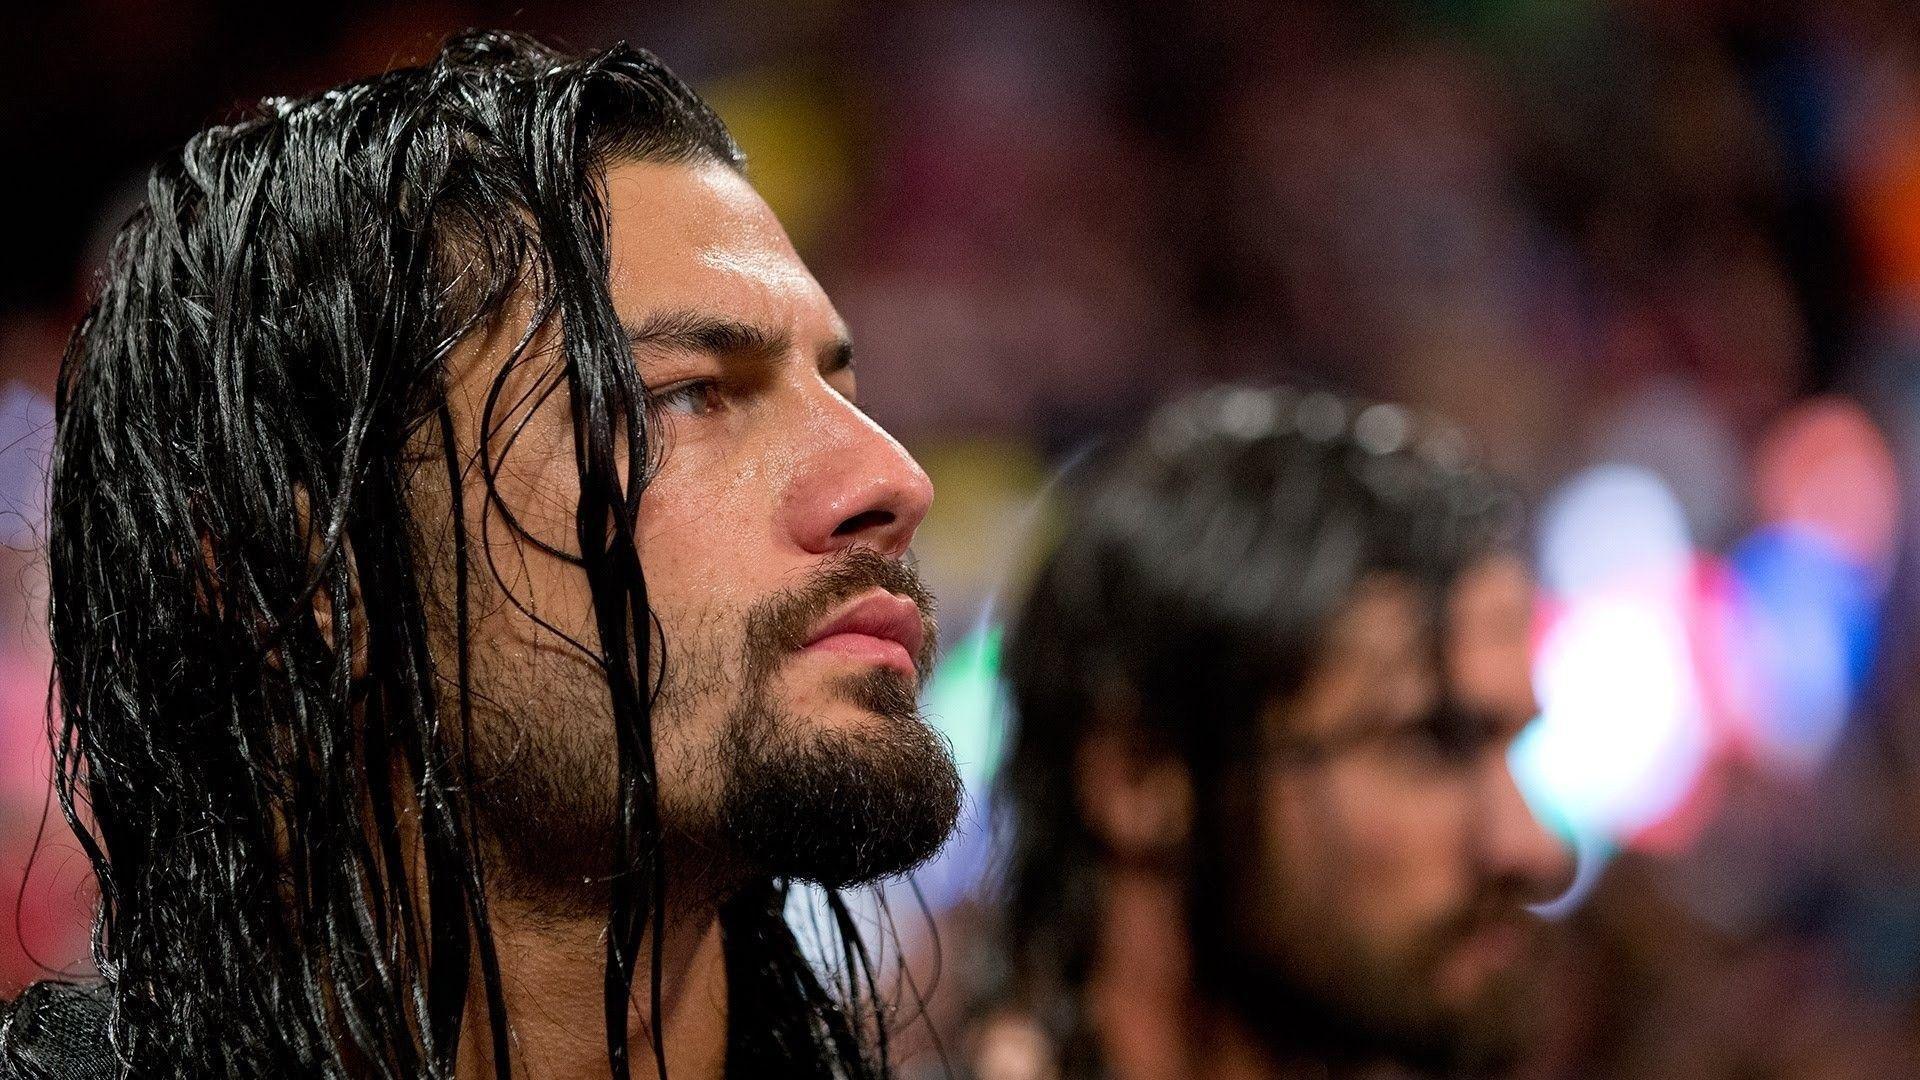 Roman Reigns HD Wallpapers Image Pictures Photos Download